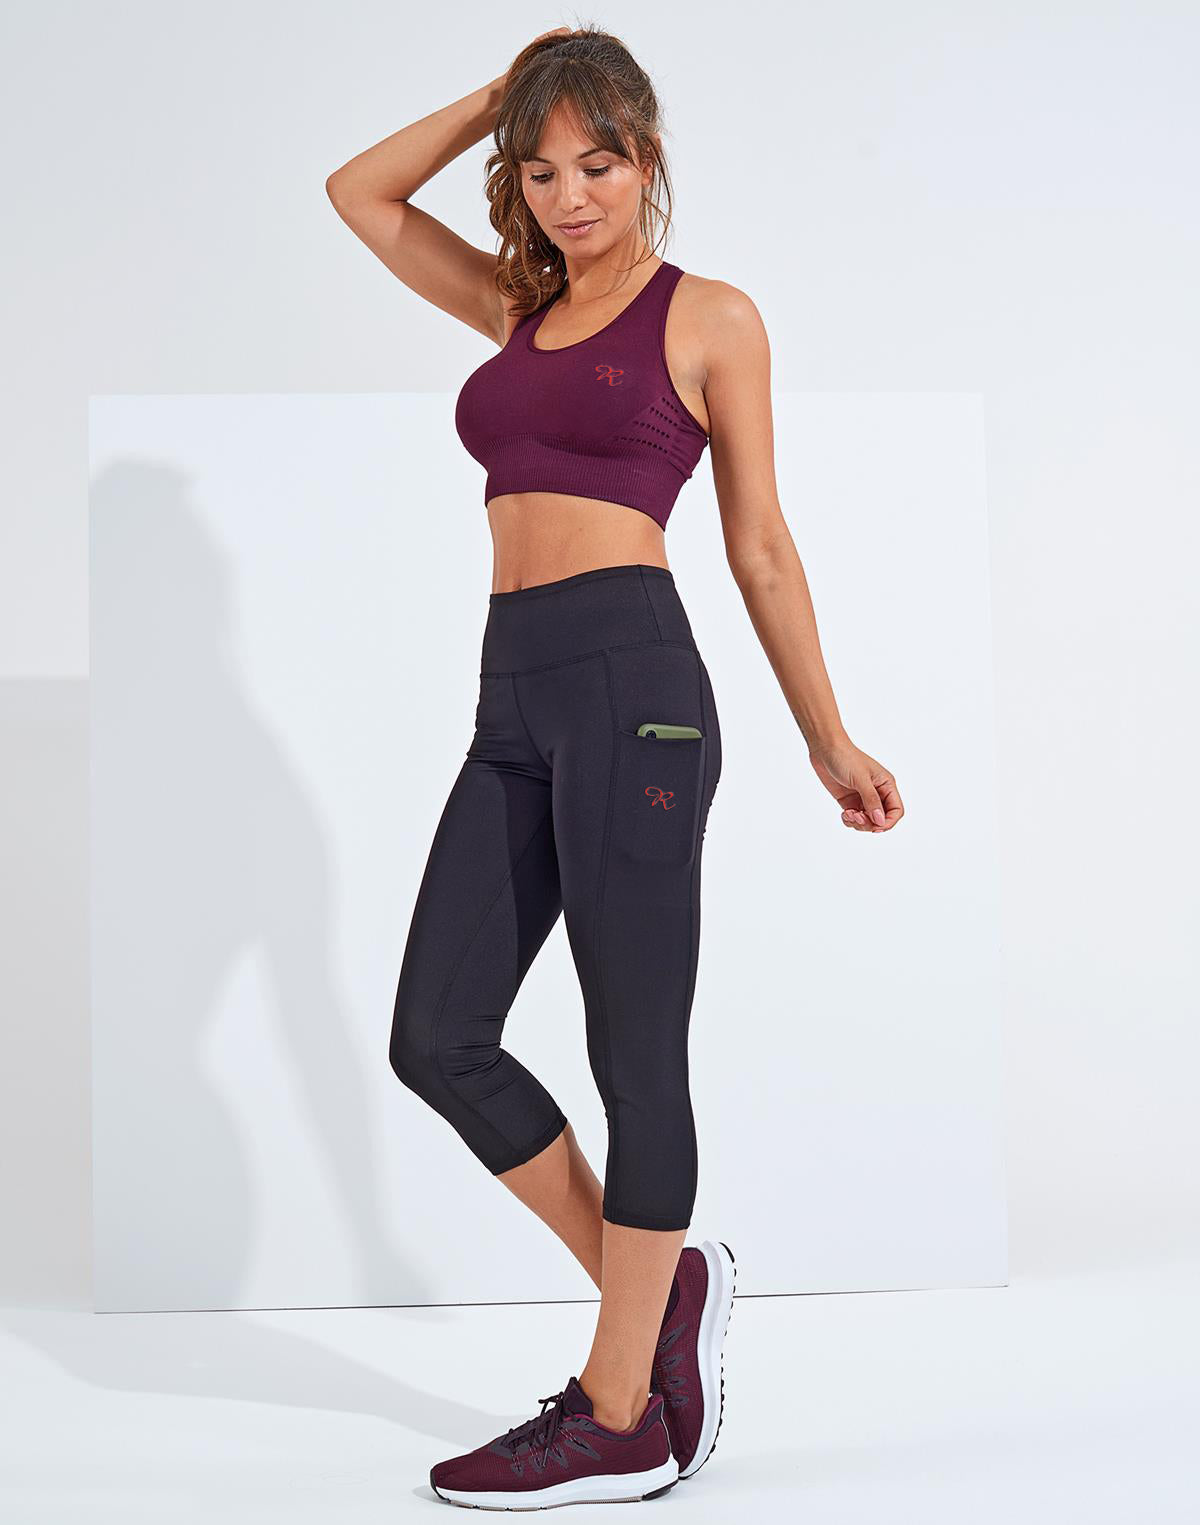 Discover Rival's women's Leggings collections, where style meets performance. From sleek activewear to casual classics, explore versatile designs crafted for the modern woman